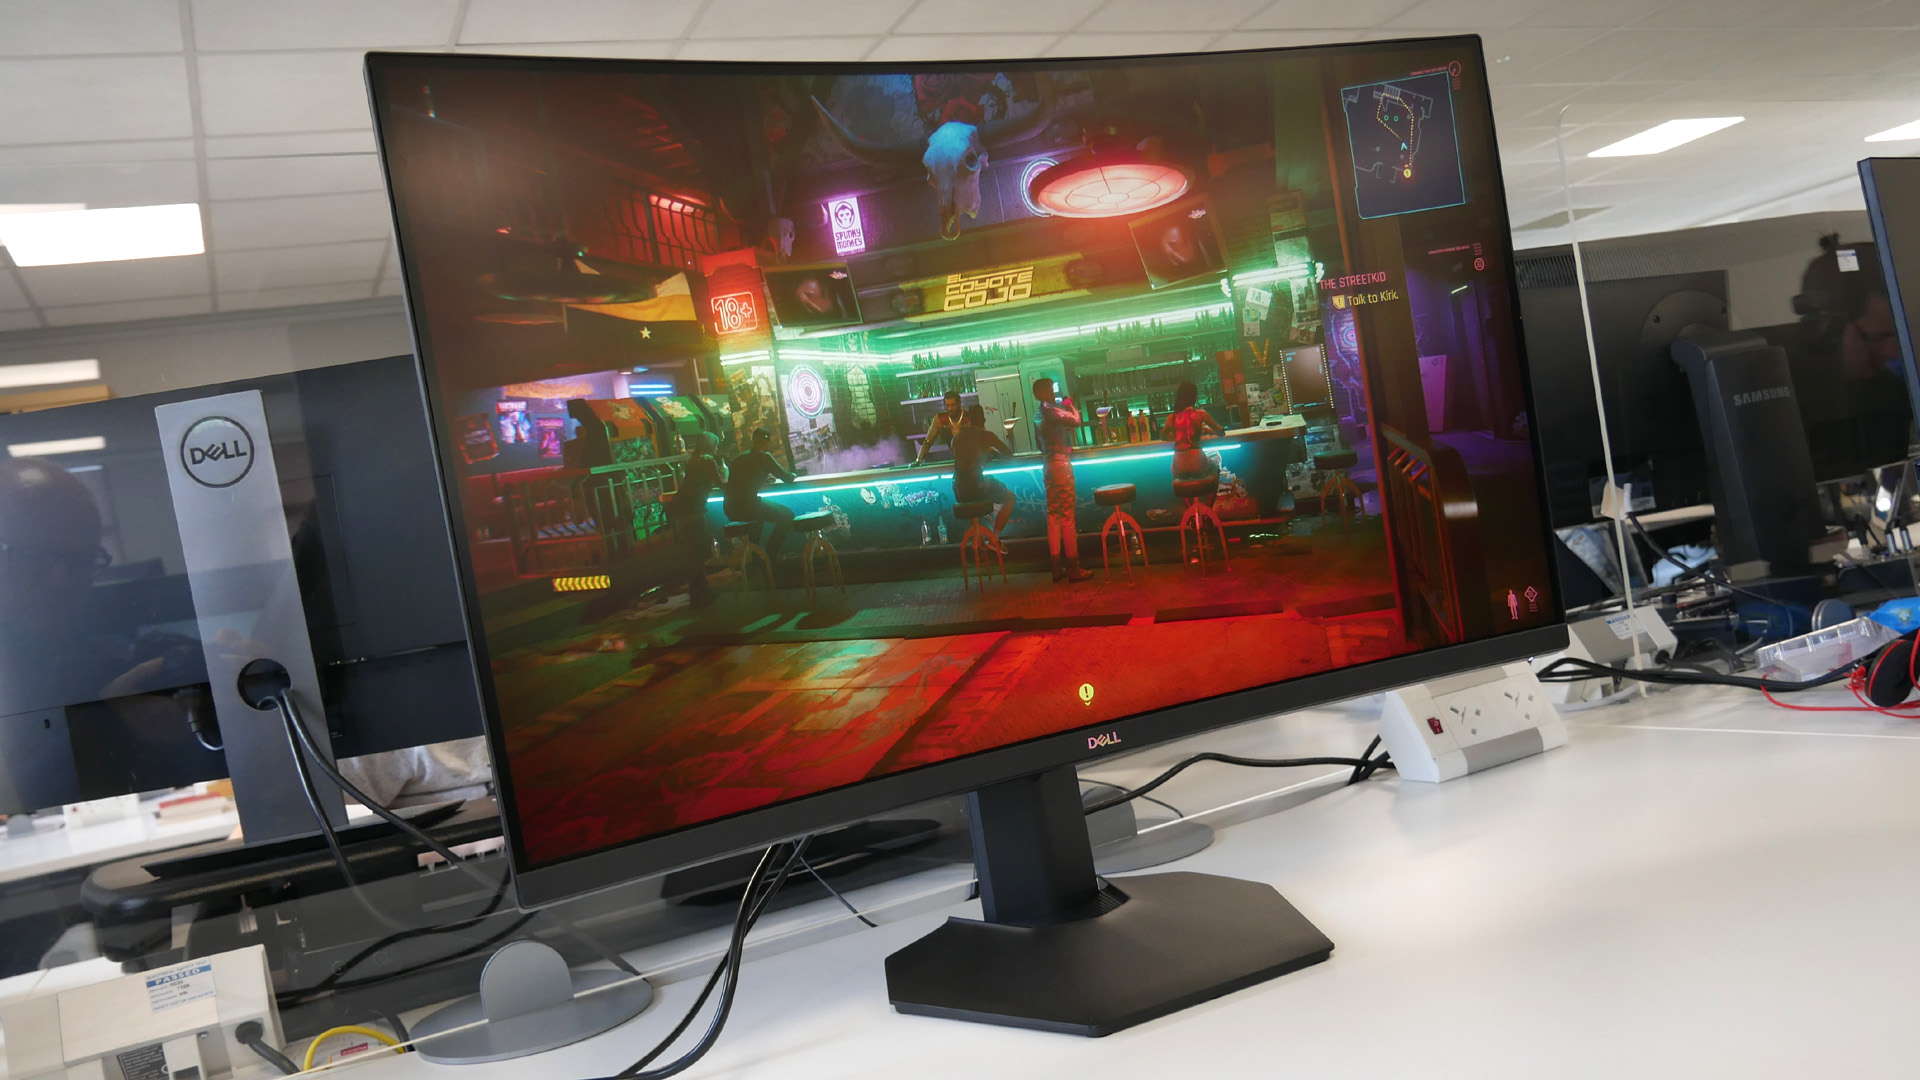  Yup, PC monitor sales have cratered too and are getting worse 